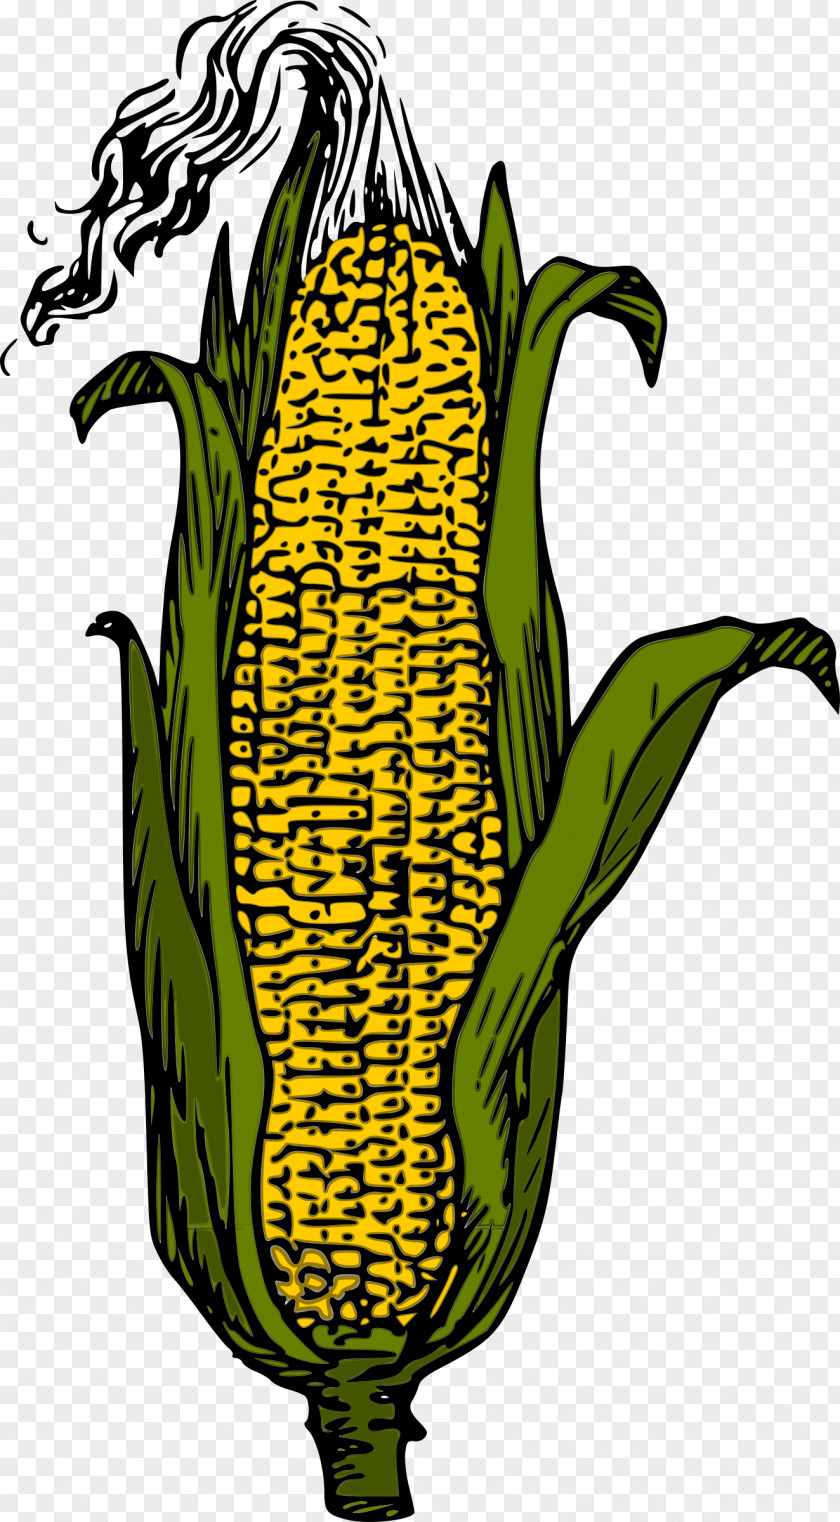 Popcorn Corn On The Cob Candy Maize Clip Art PNG